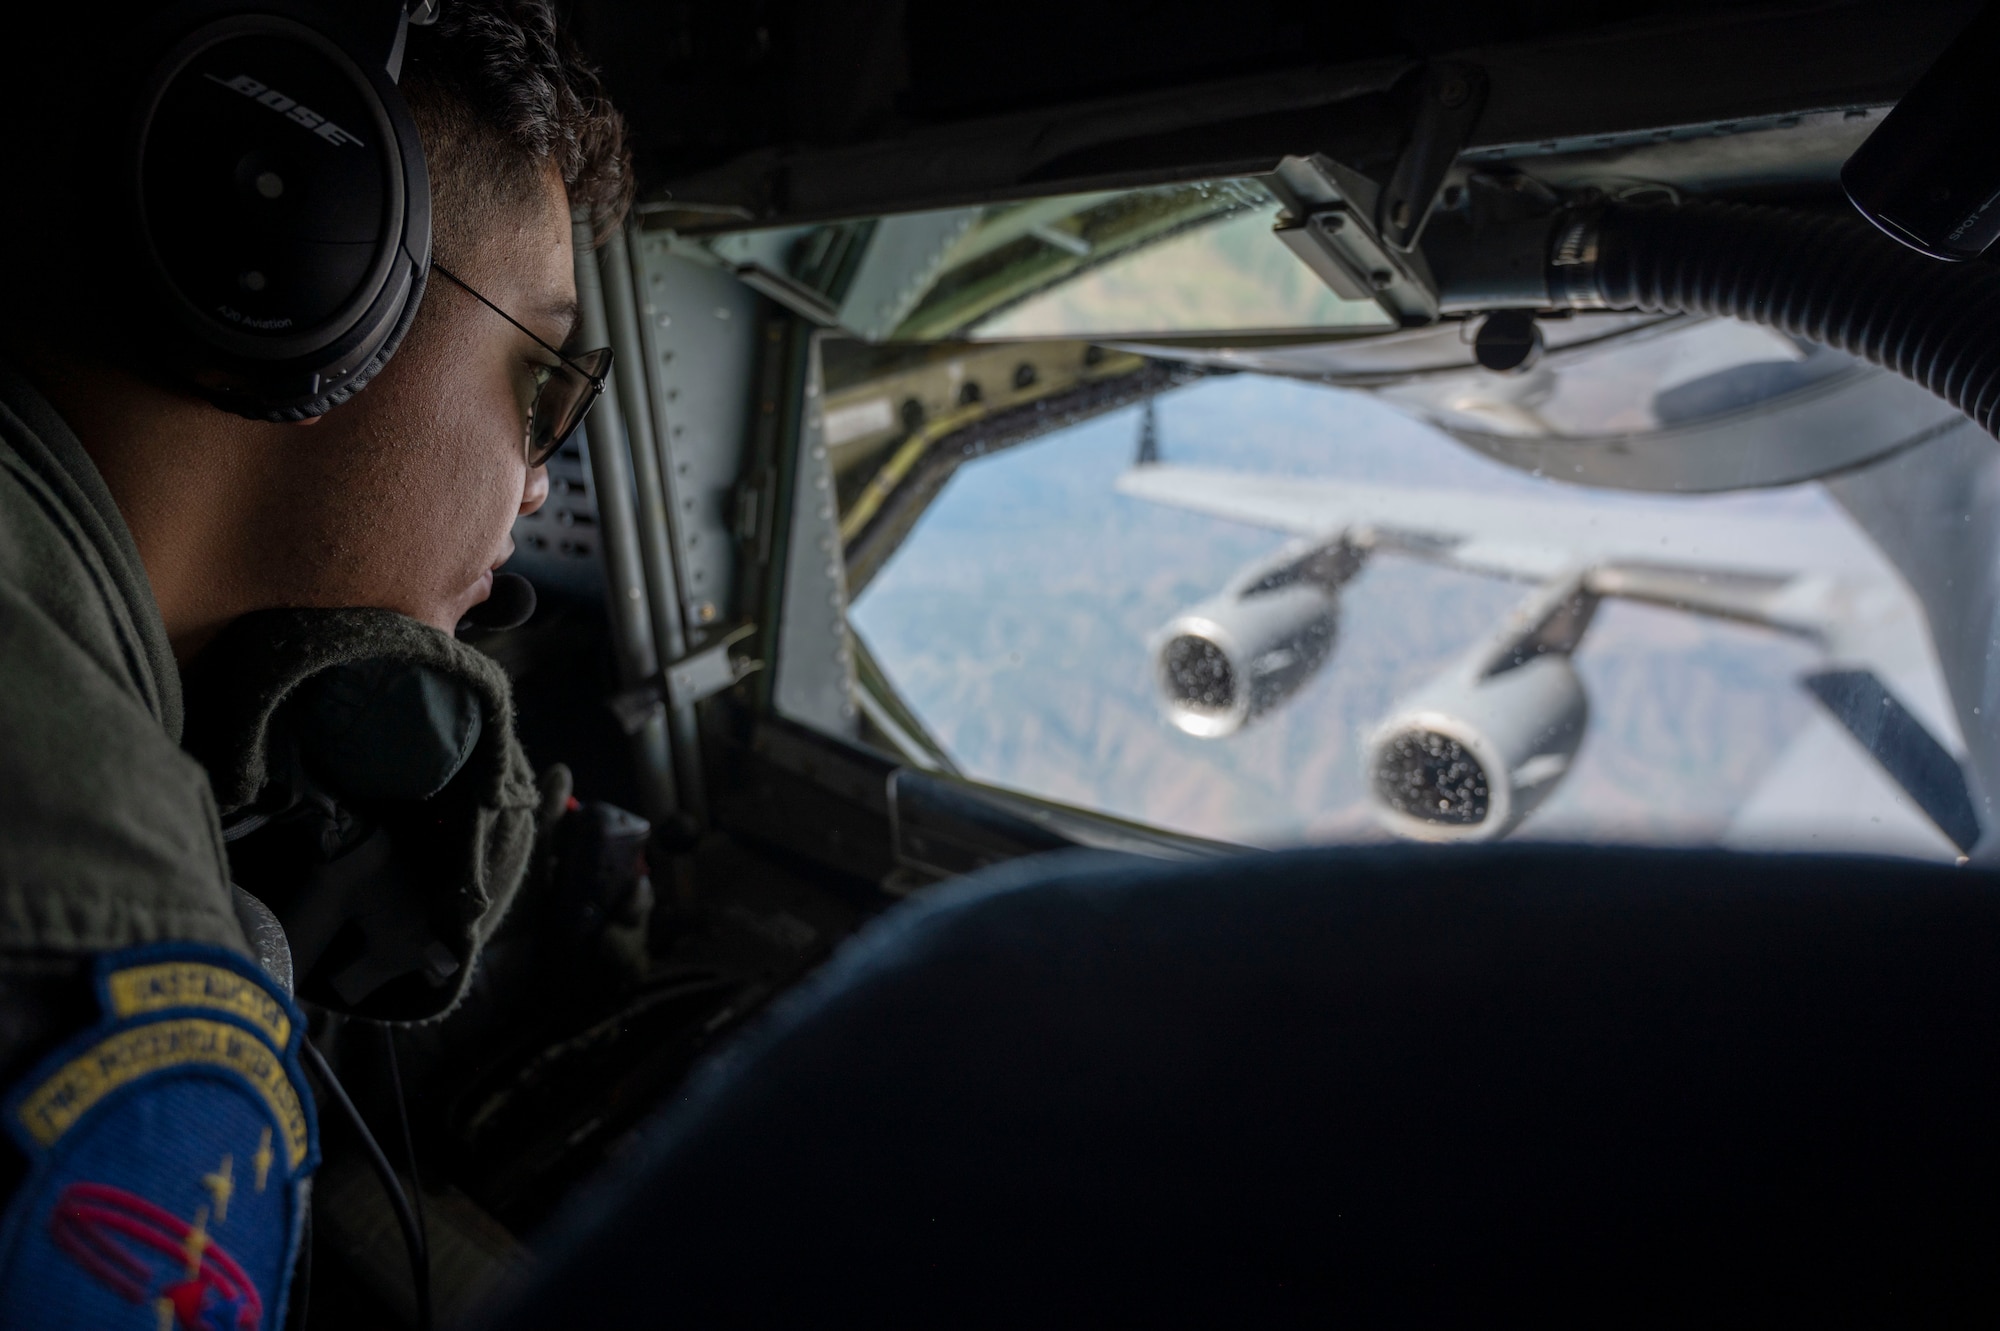 U.S. Air Force Senior Airman Aziel Alvarado, an in-flight refueling specialist assigned to the 97th Air Refueling Squadron, refuels a C-17 Globemaster III from Fairchild Air Force Base, Washington, June 22, 2023. Alvarado participated in a Pride flight that honors the diverse backgrounds and strengths that the lesbian, gay, bisexual, trans, queer, plus Airmen bring to the Fairchild mission. (U.S. Air Force photo by Airman 1st Class Lillian Patterson)